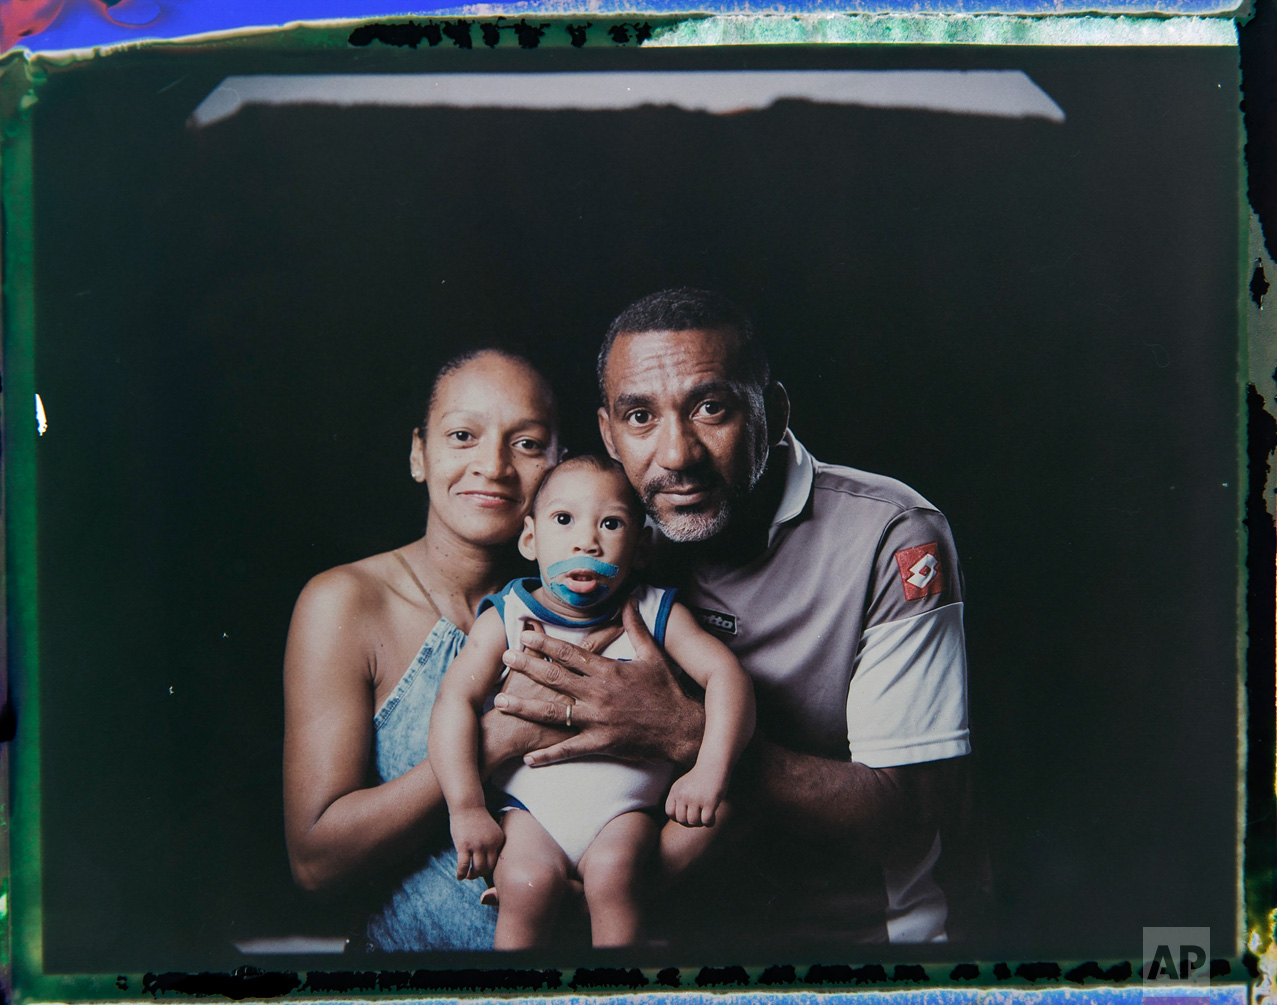  In this Sept. 29, 2016 photo made from a negative recovered from instant film, Diana Felix and Carlos Alberto Dias, pose with their son, Ezequiel, who was born with microcephaly, one of many serious medical problems that can be caused by congenital 